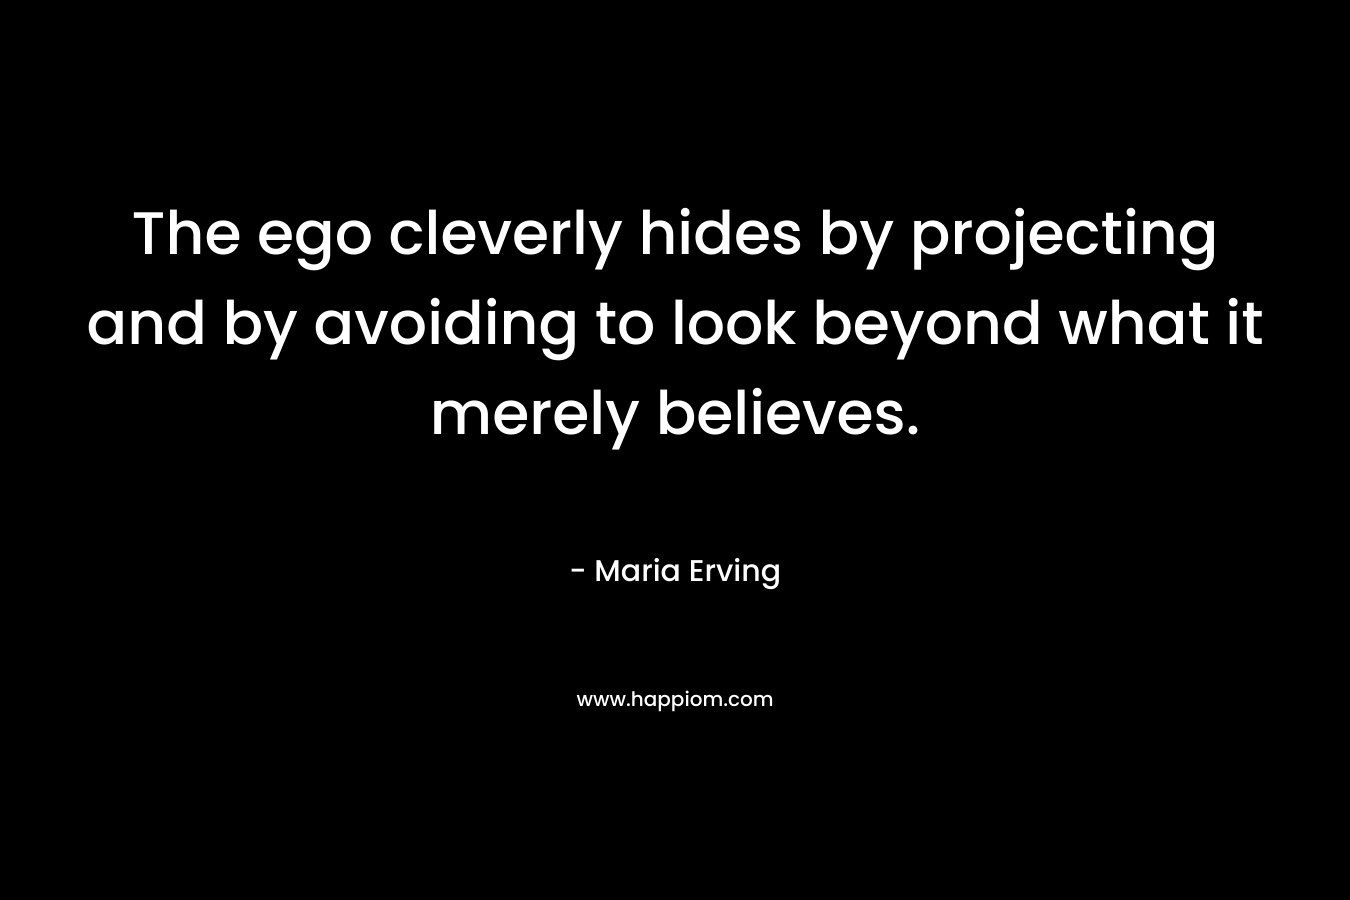 The ego cleverly hides by projecting and by avoiding to look beyond what it merely believes.